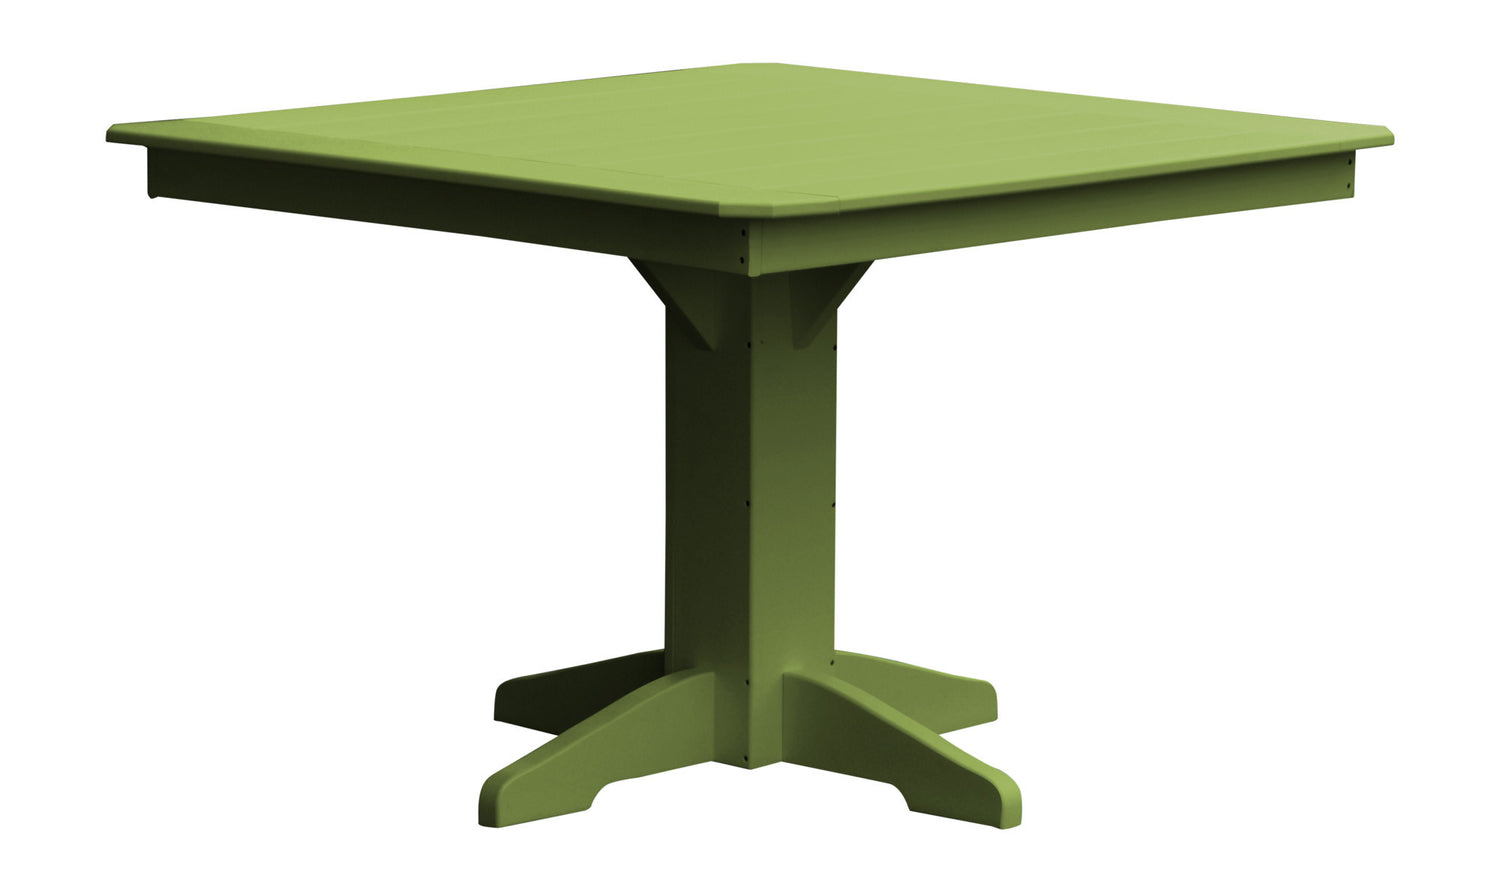 44" Outdoor Recycled Plastic Patio Dining Tables